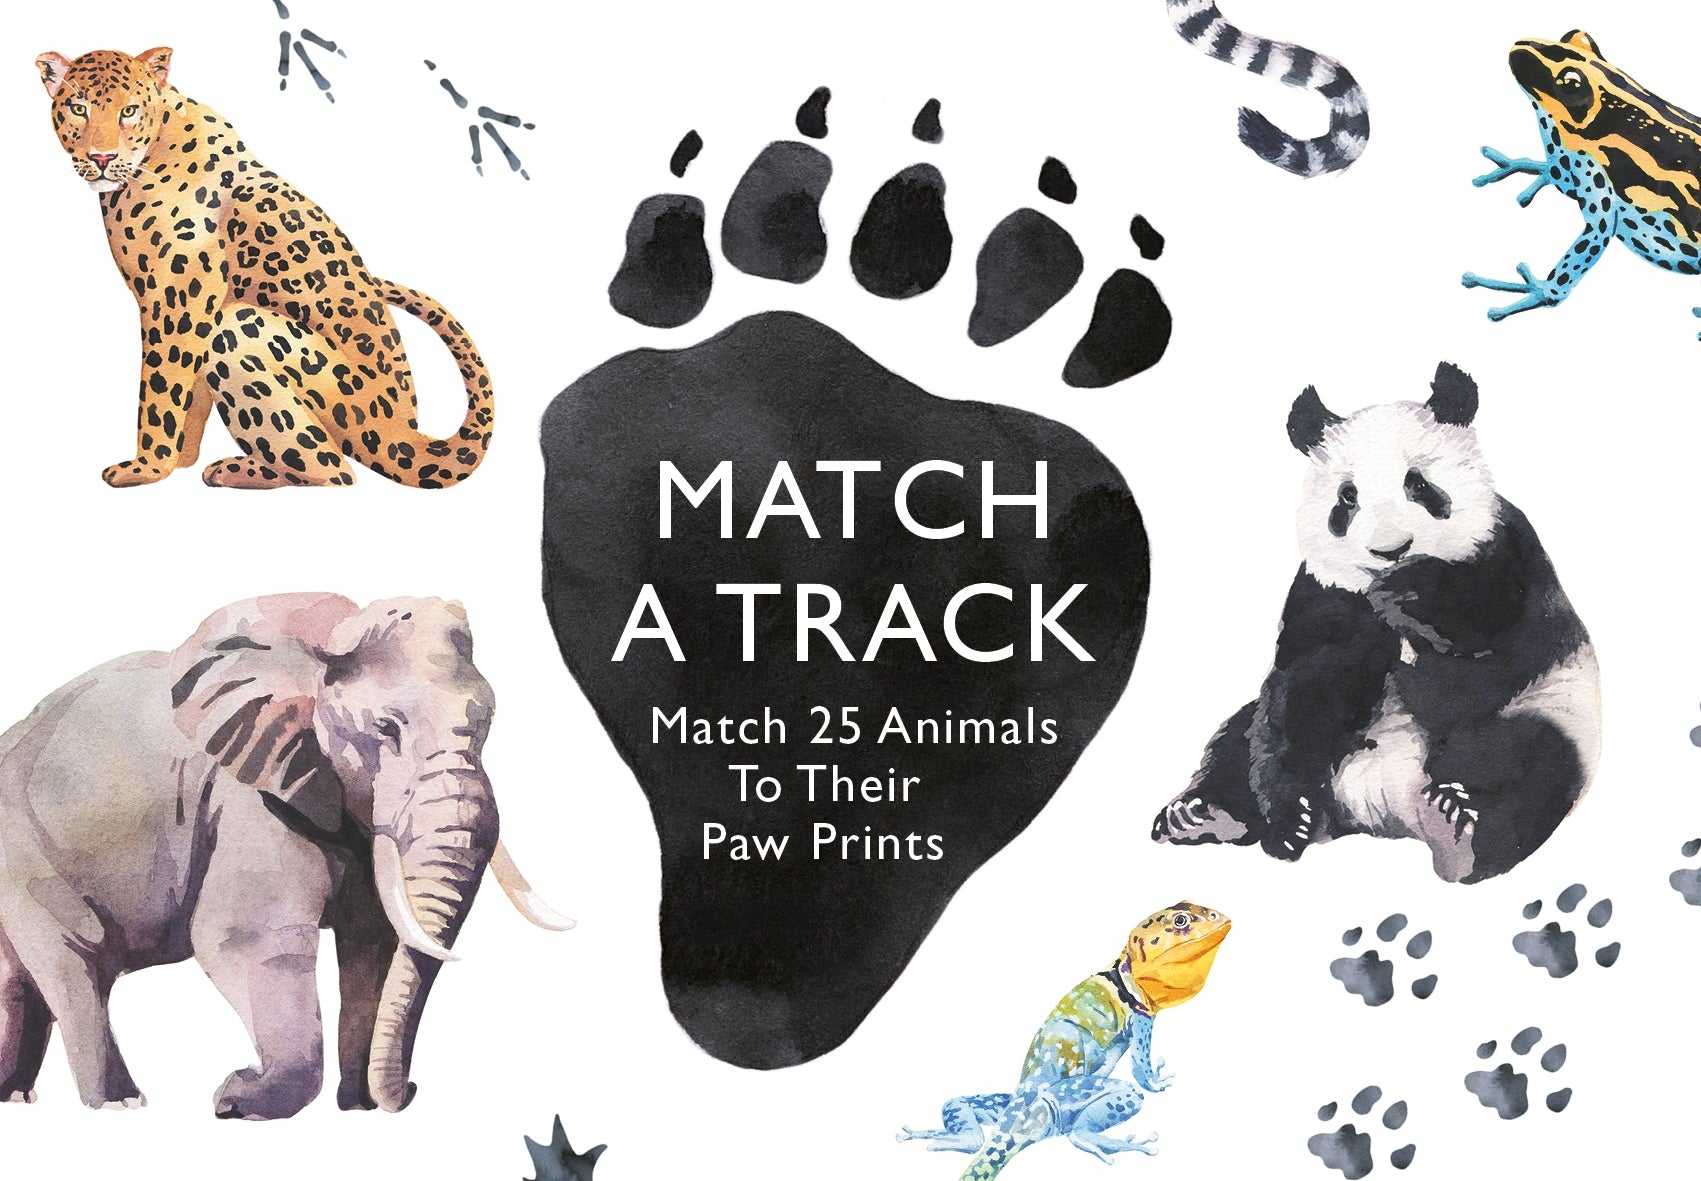 Match a Track by Laurence King Publishing